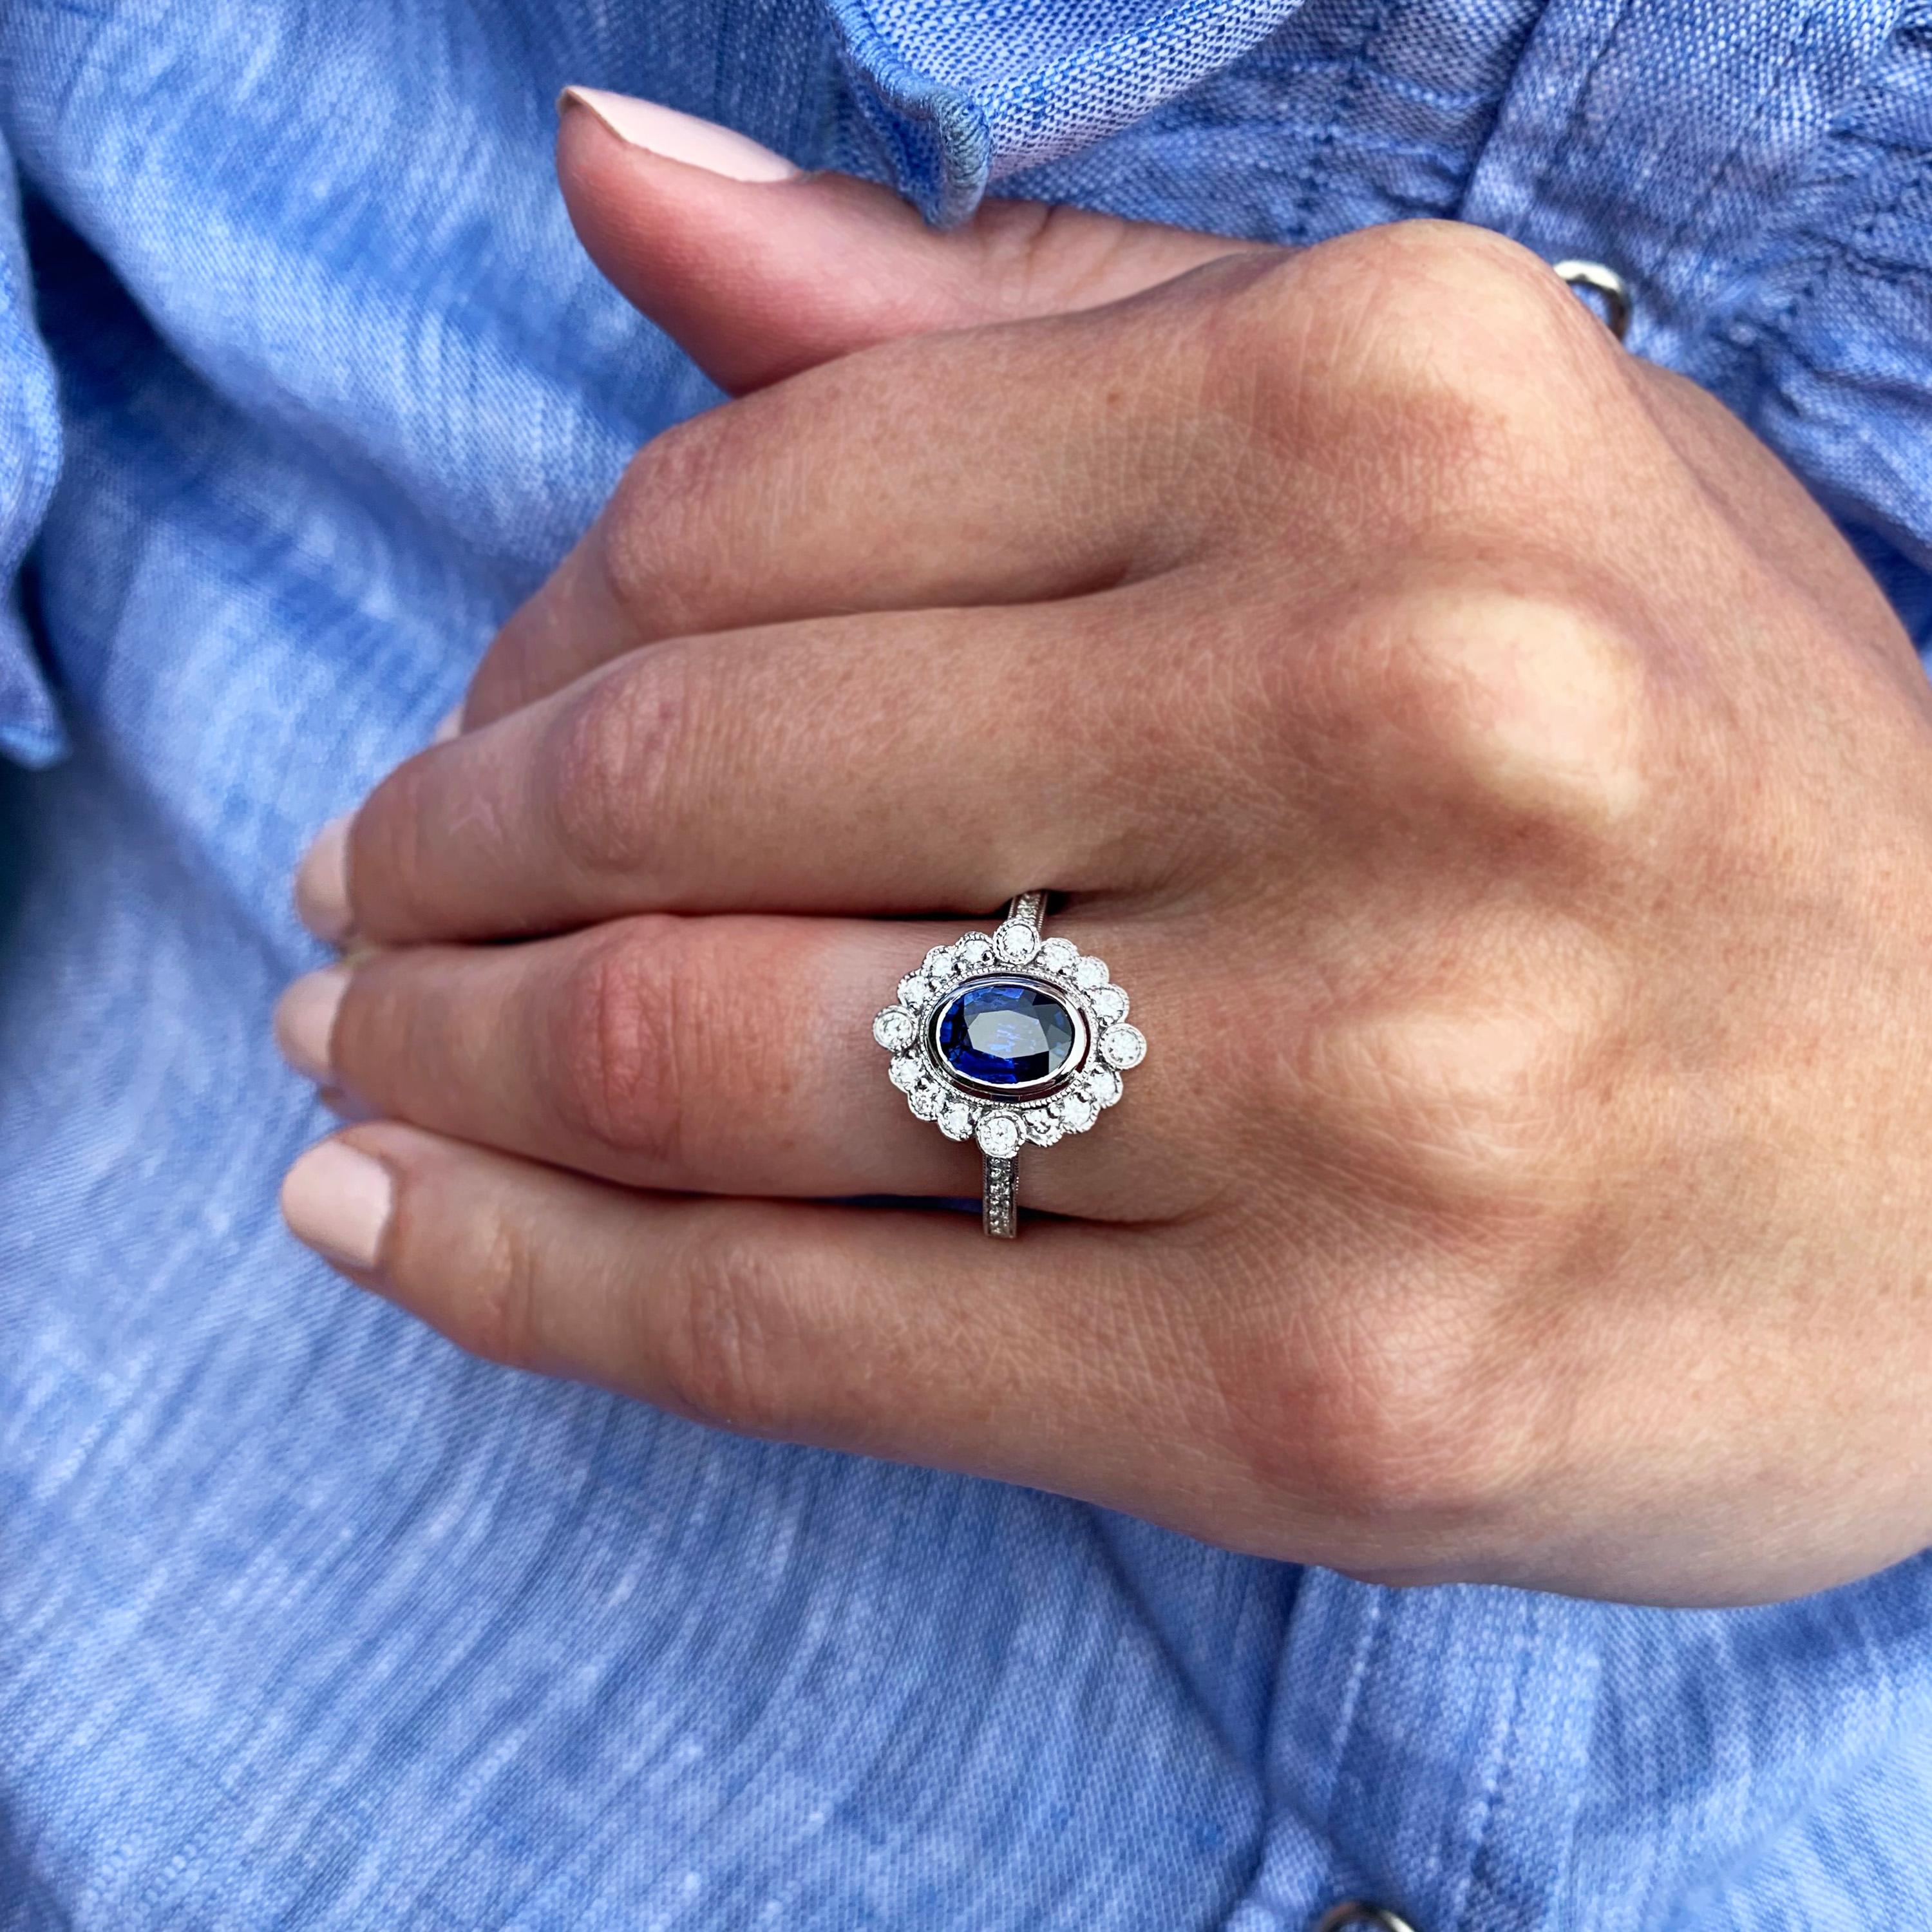 A beautiful sapphire and diamond engagement ring made in 18k white gold. Vintage inspired alternative engagement ring set with gorgeous vibrant blue oval sapphire (0.88ct). A vintage style halo surrounds the neat bezel setting with intricately set